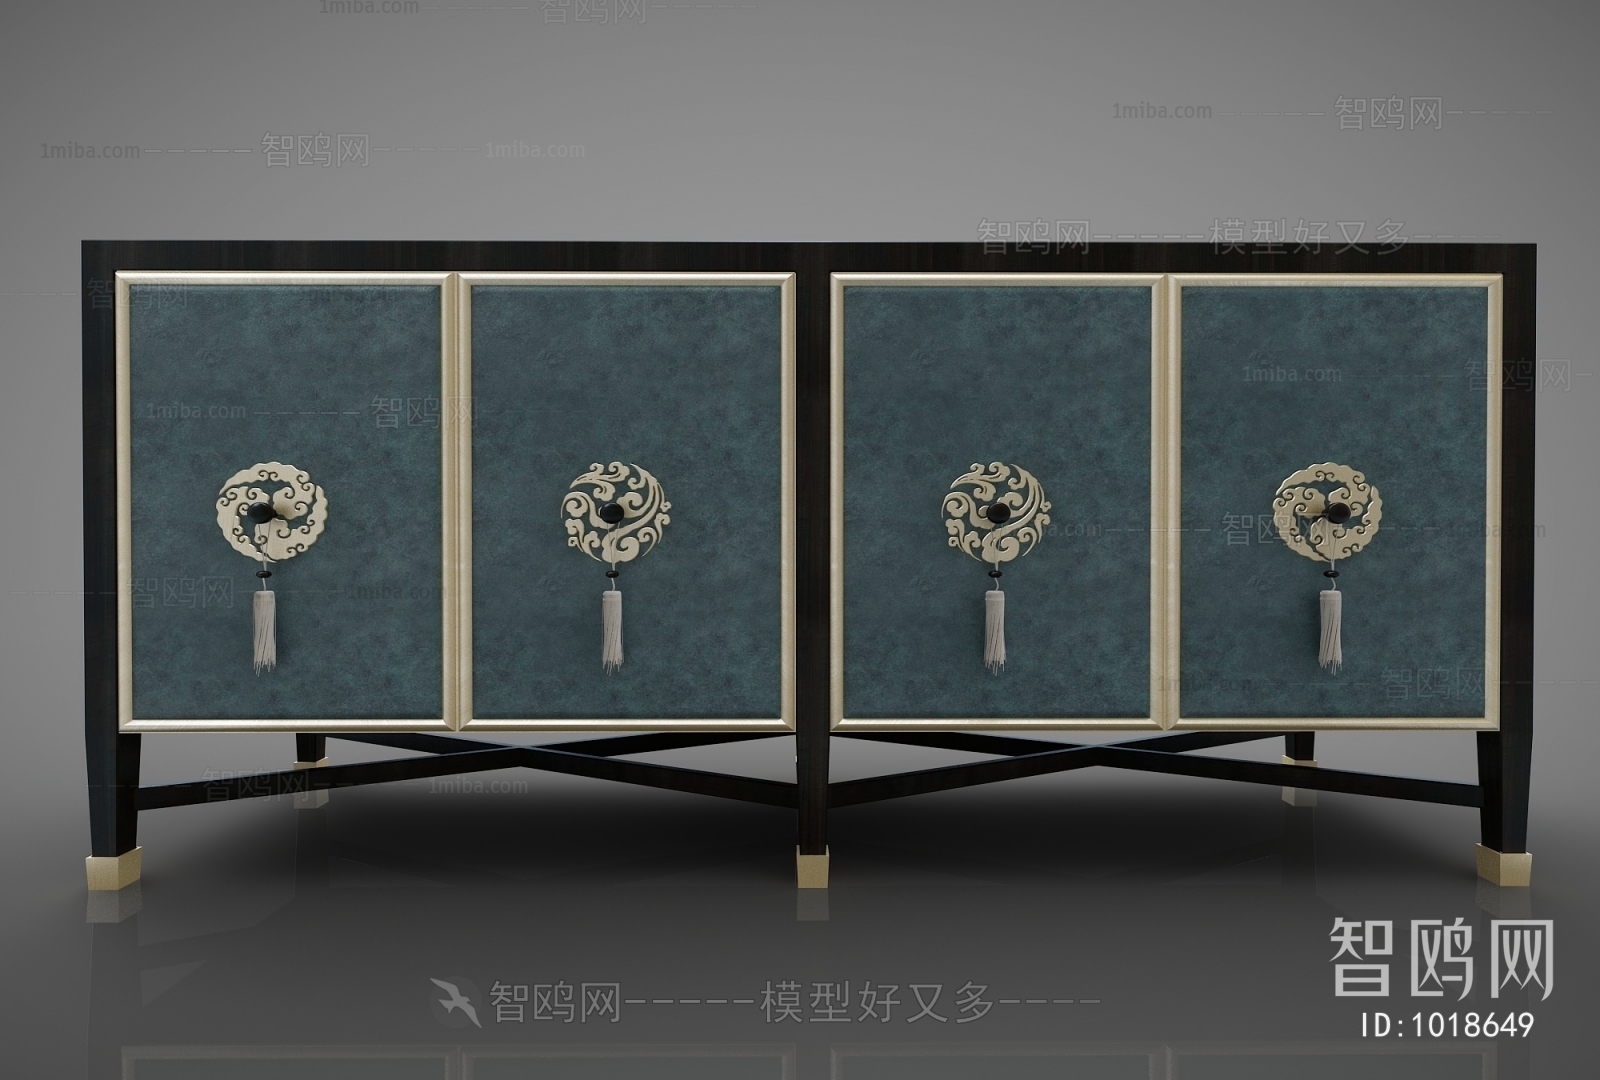 New Chinese Style Decorative Cabinet